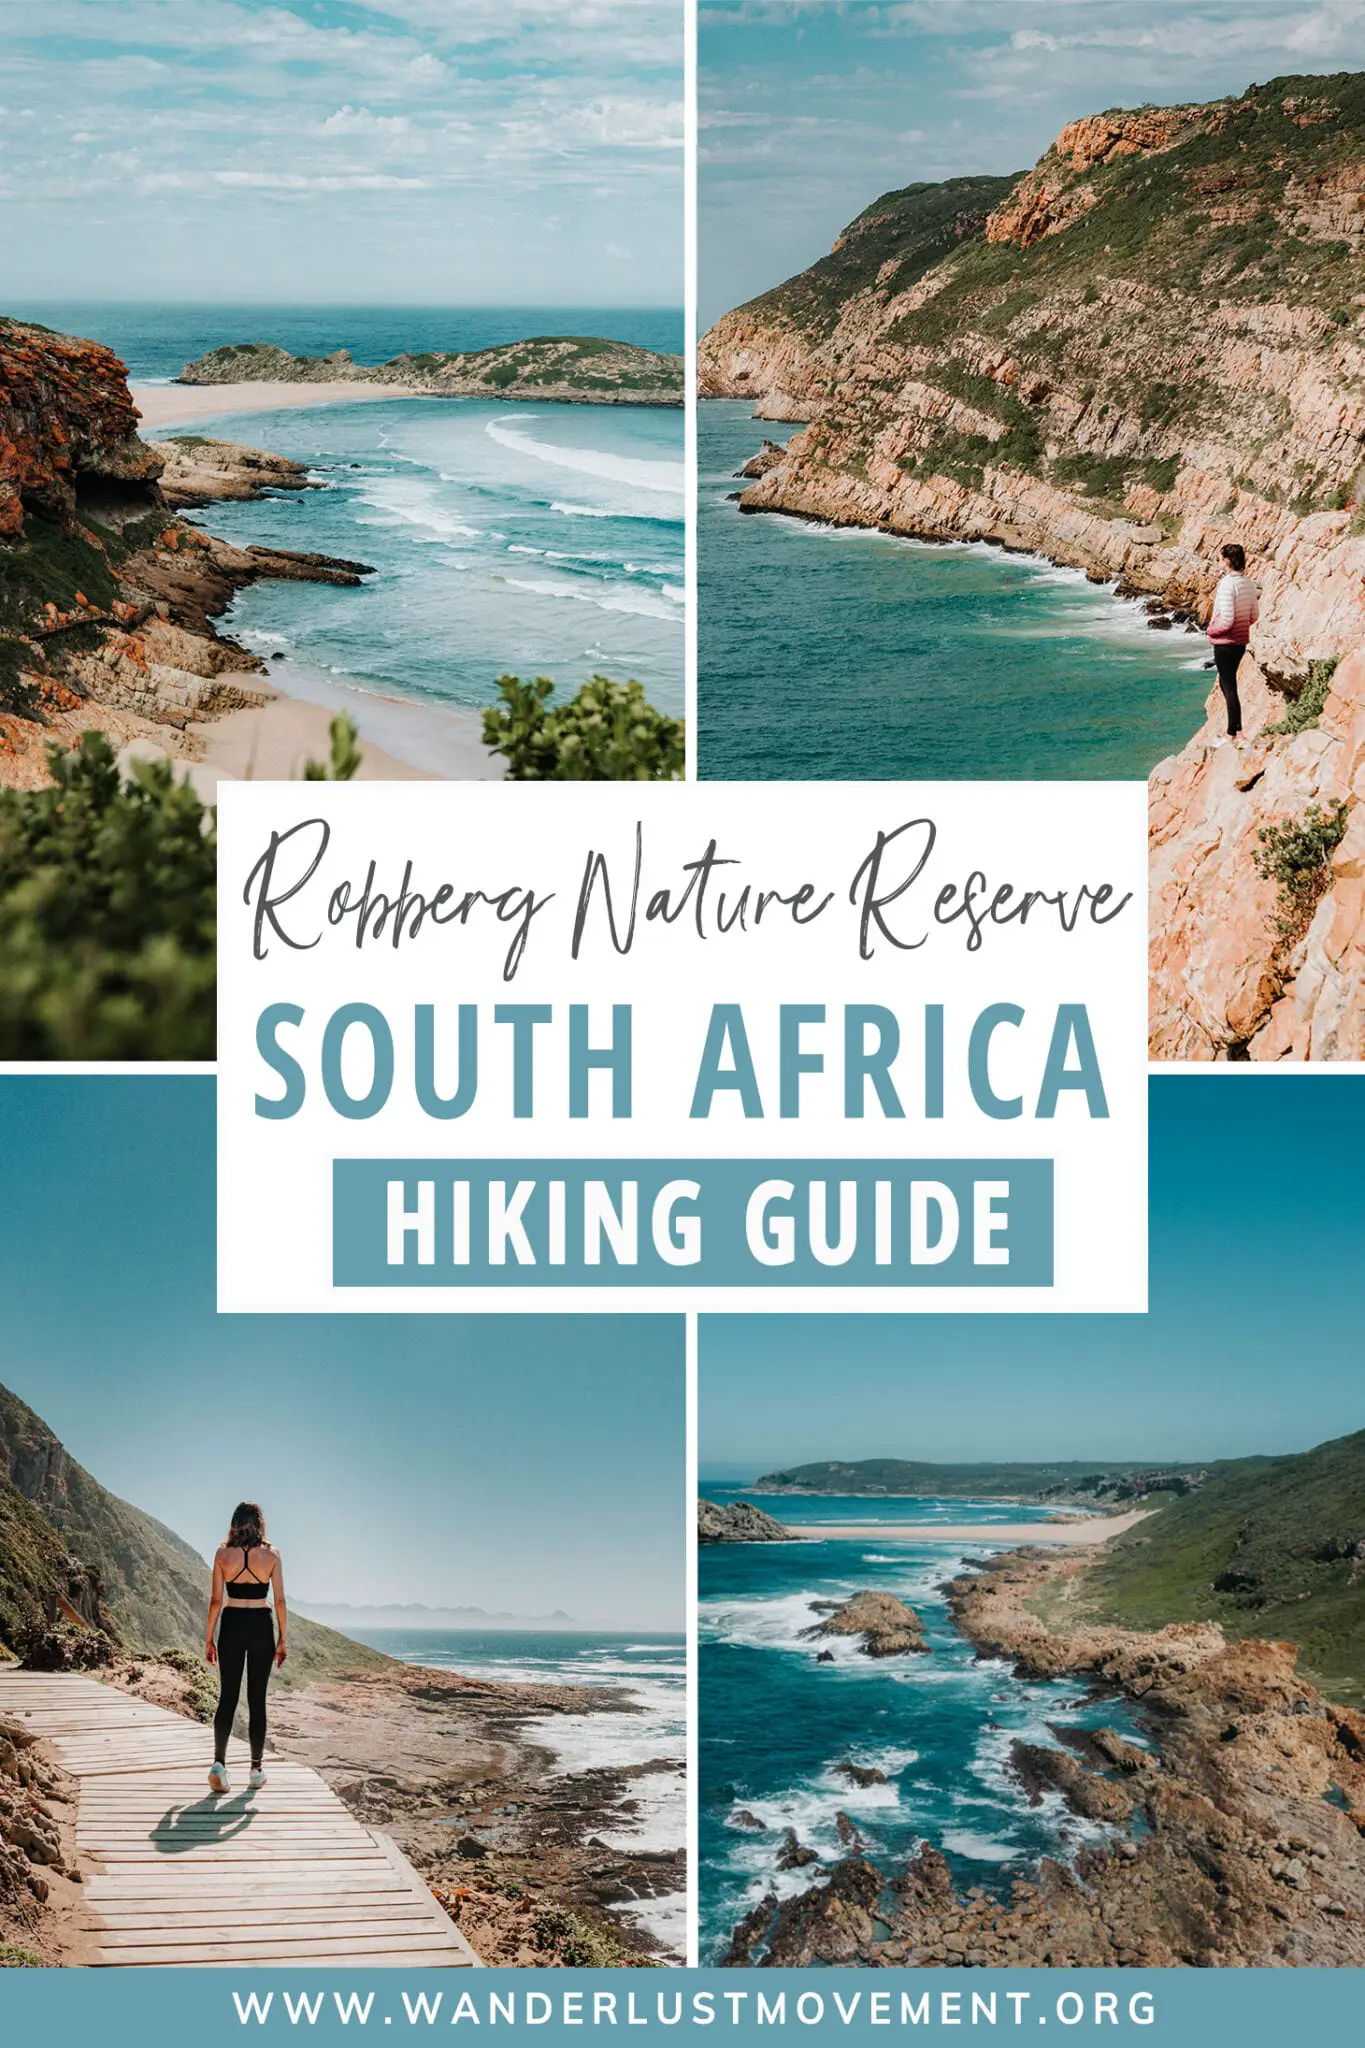 Hiking Robberg Nature Reserve: Everything You Need to Know